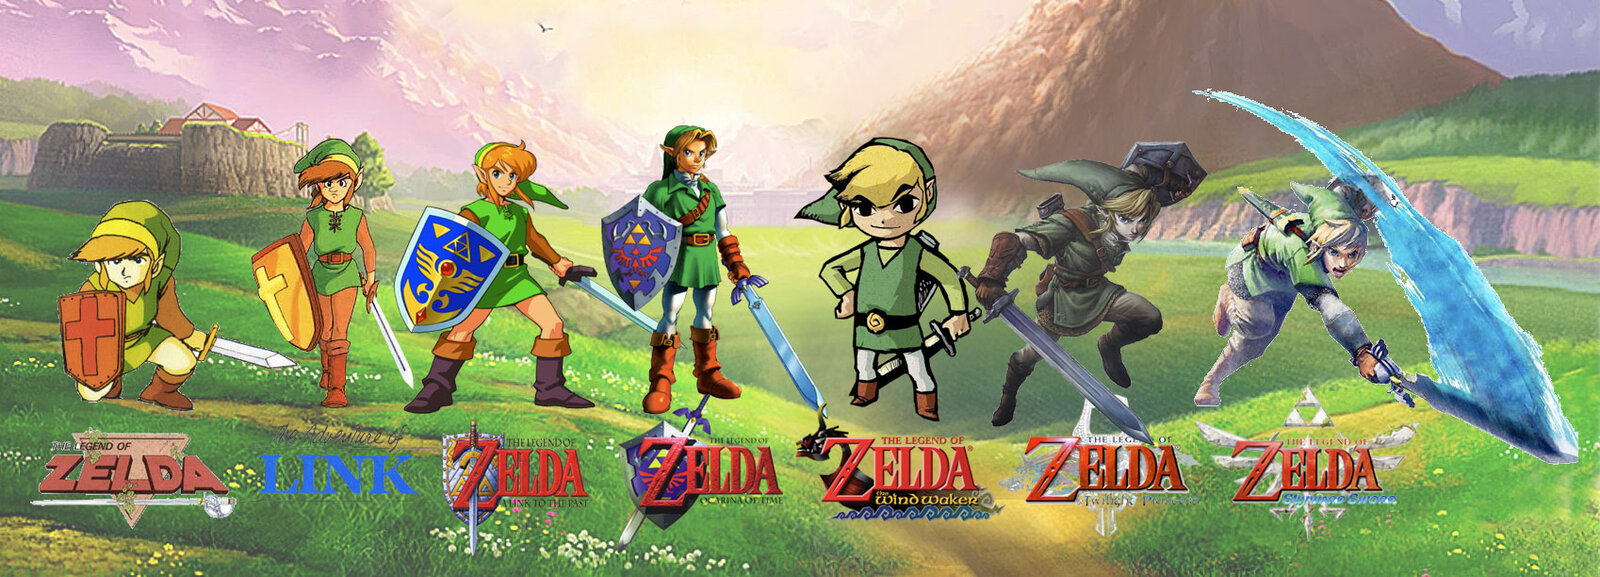 Celebrate The Legend Of Zelda 35th Anniversary With These Timeline Memes Film Daily